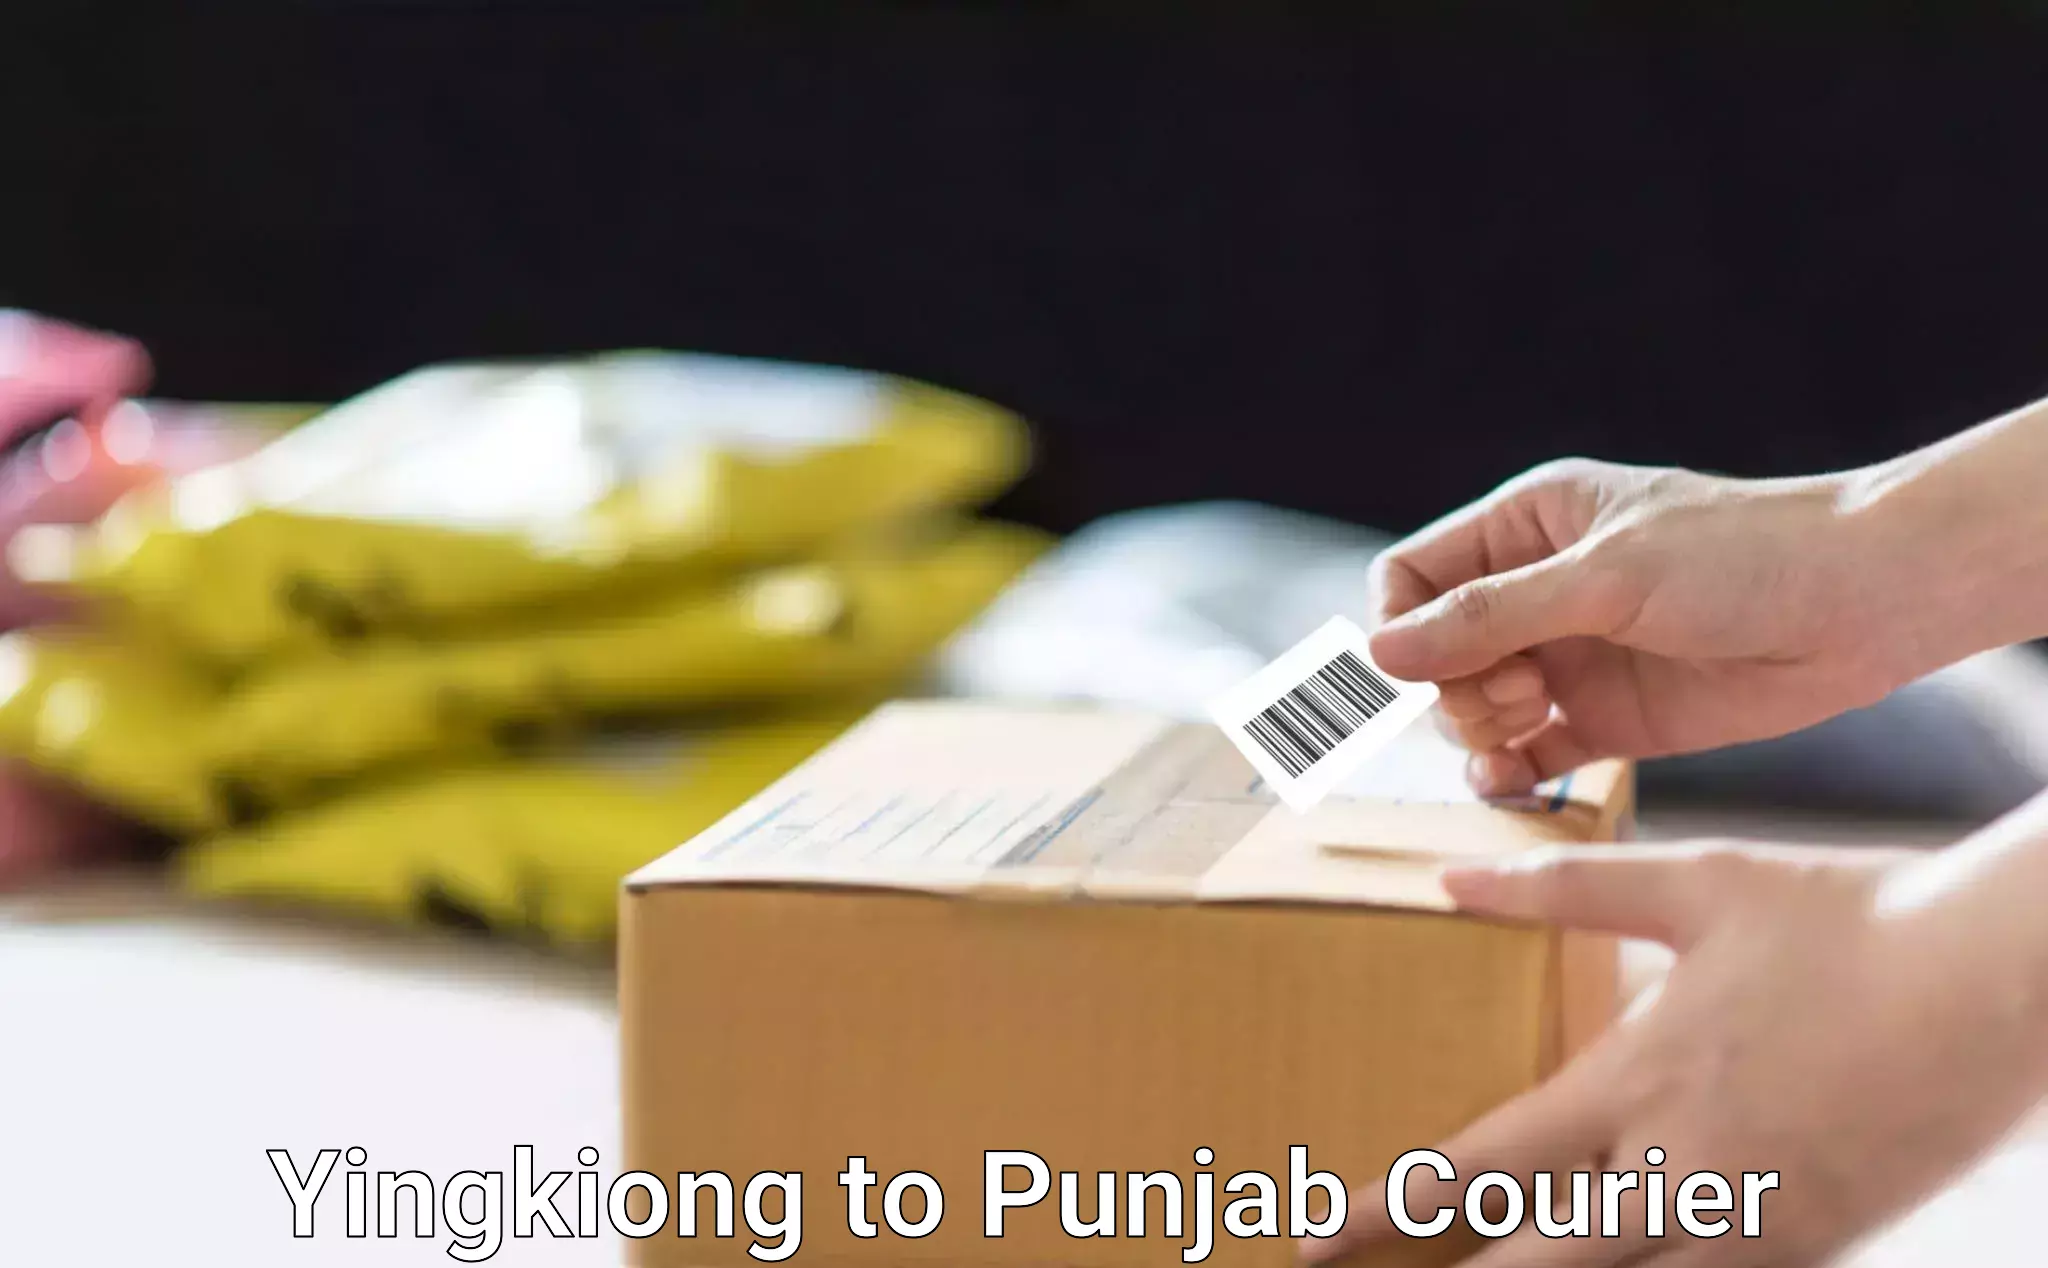 Heavy parcel delivery Yingkiong to Punjab